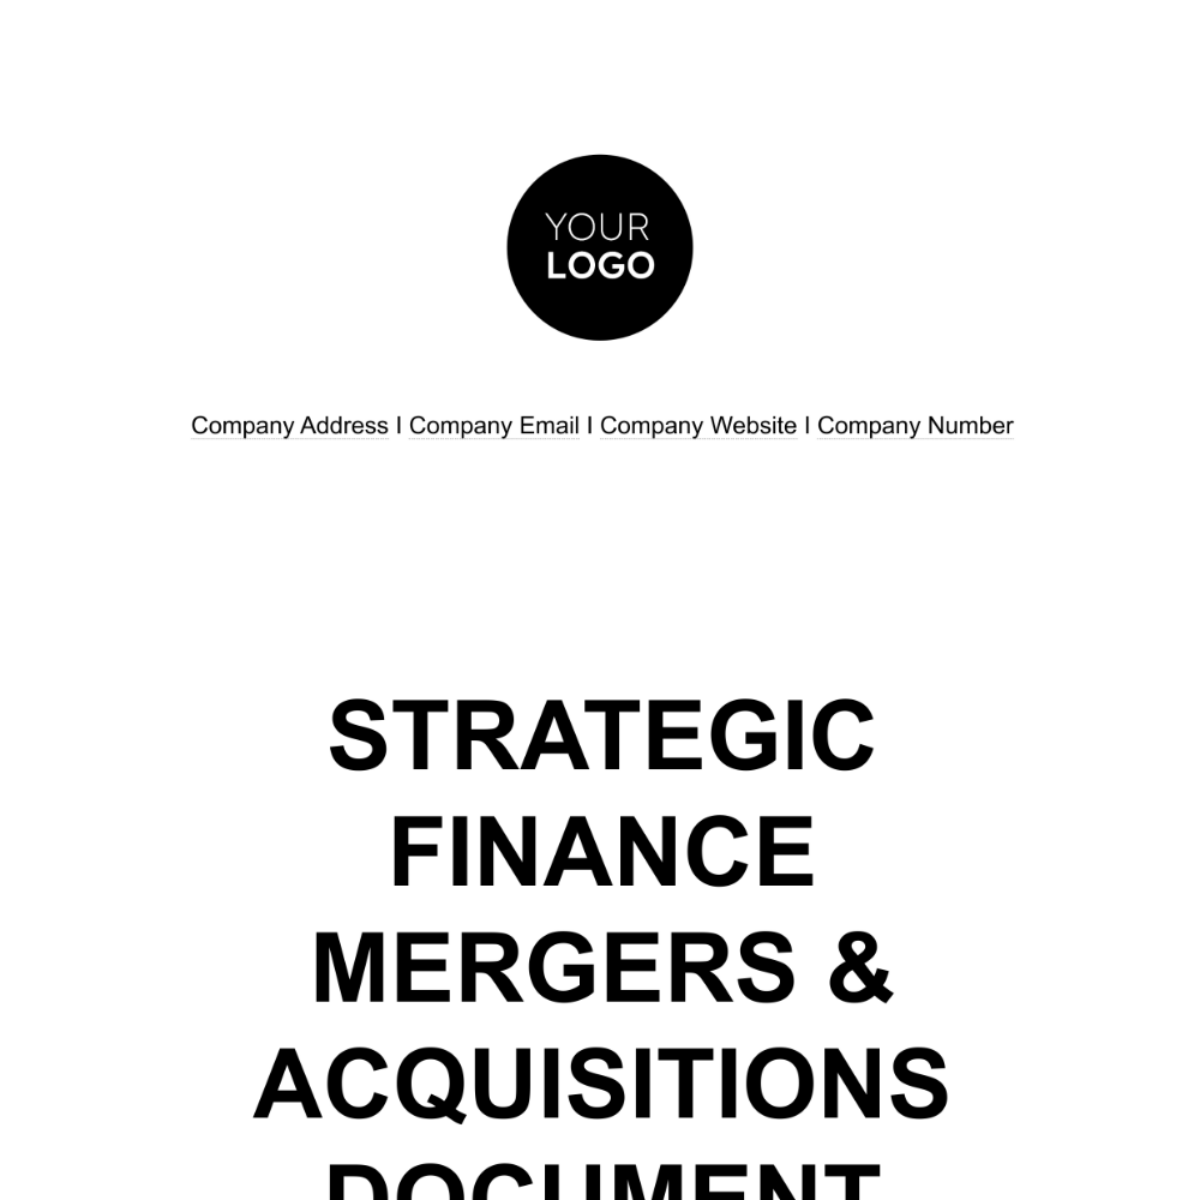 Strategic Finance Mergers & Acquisitions Document Template